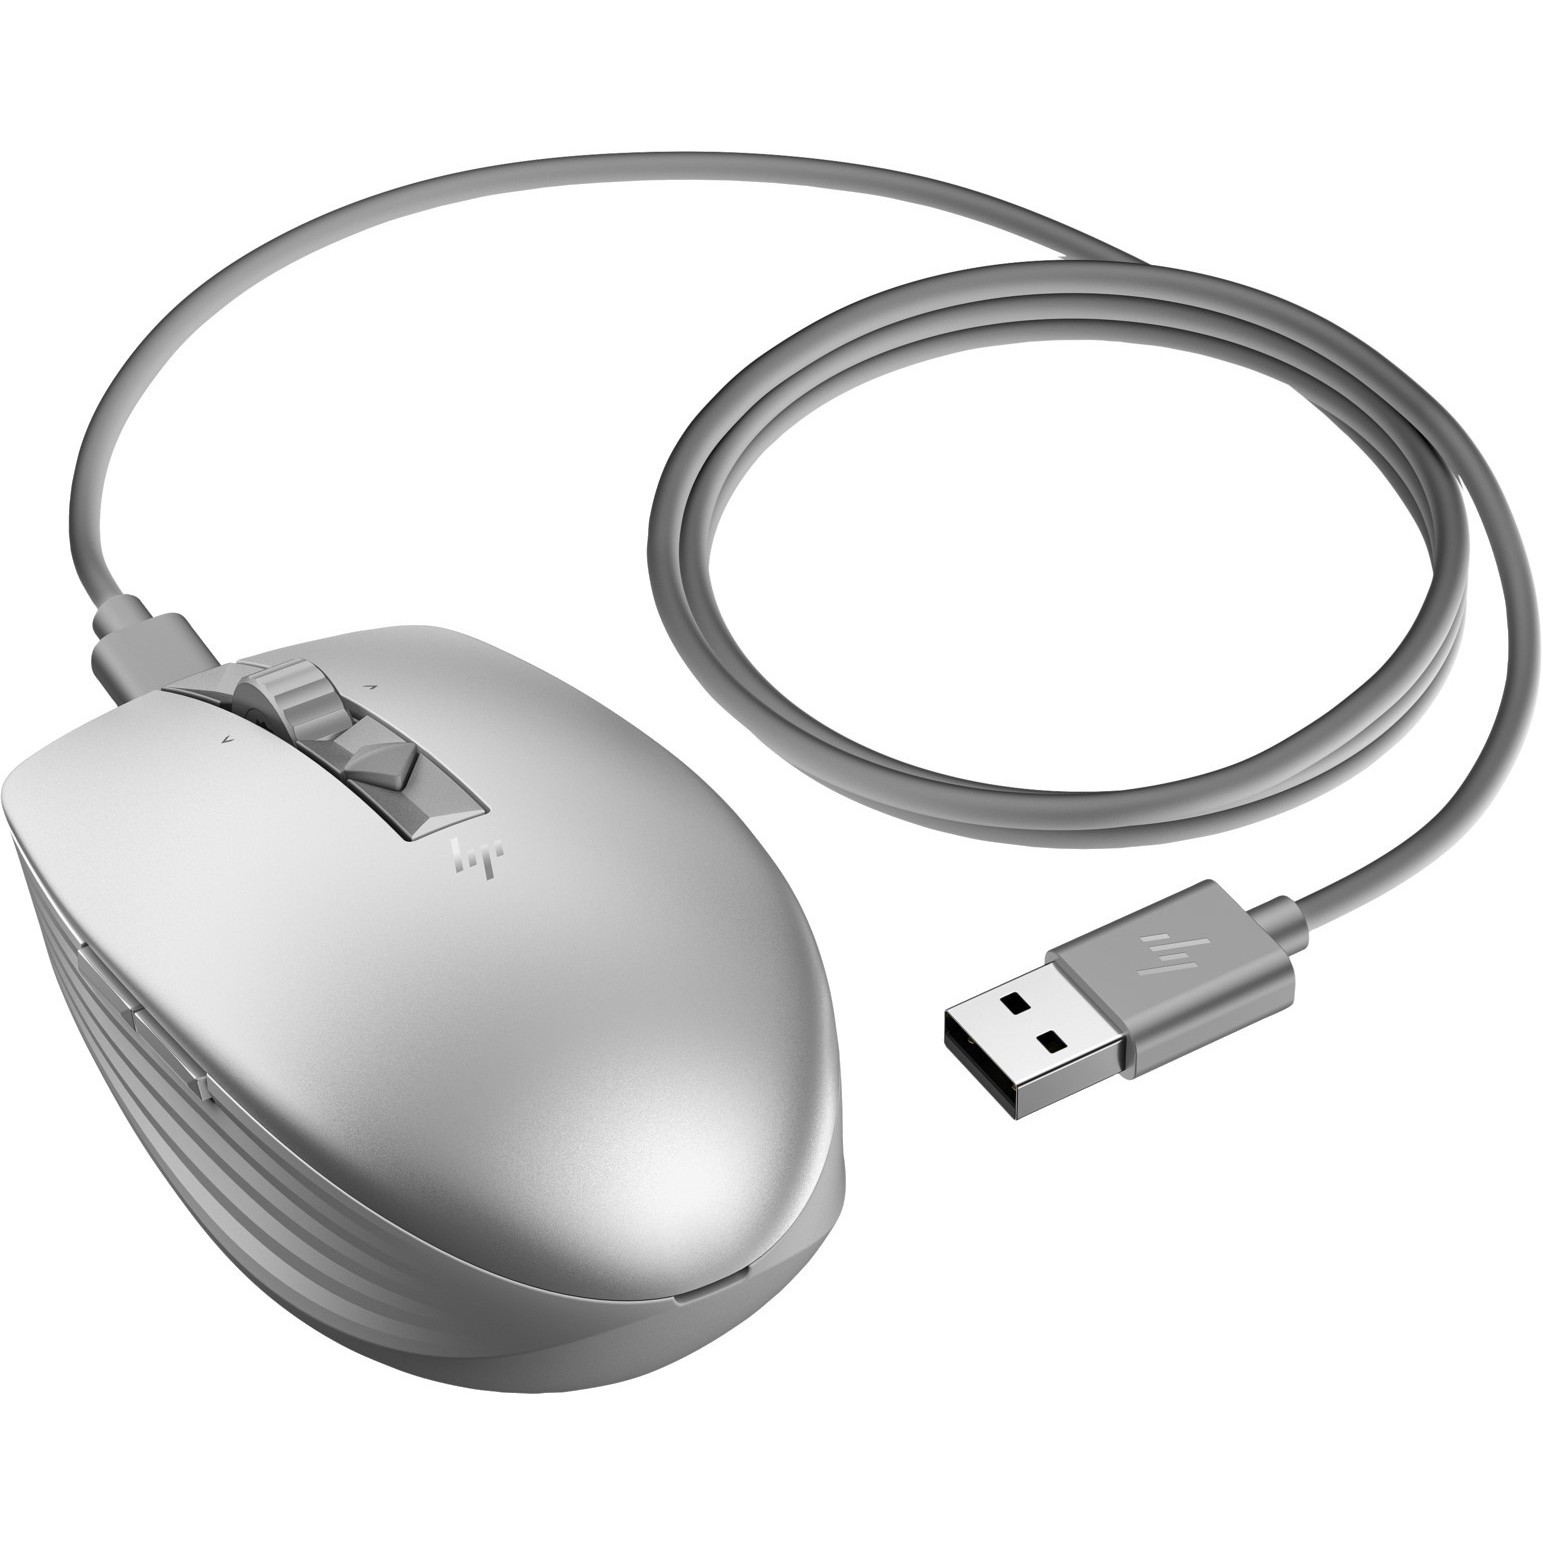 Мышки HP 710 Rechargeable Silent Mouse